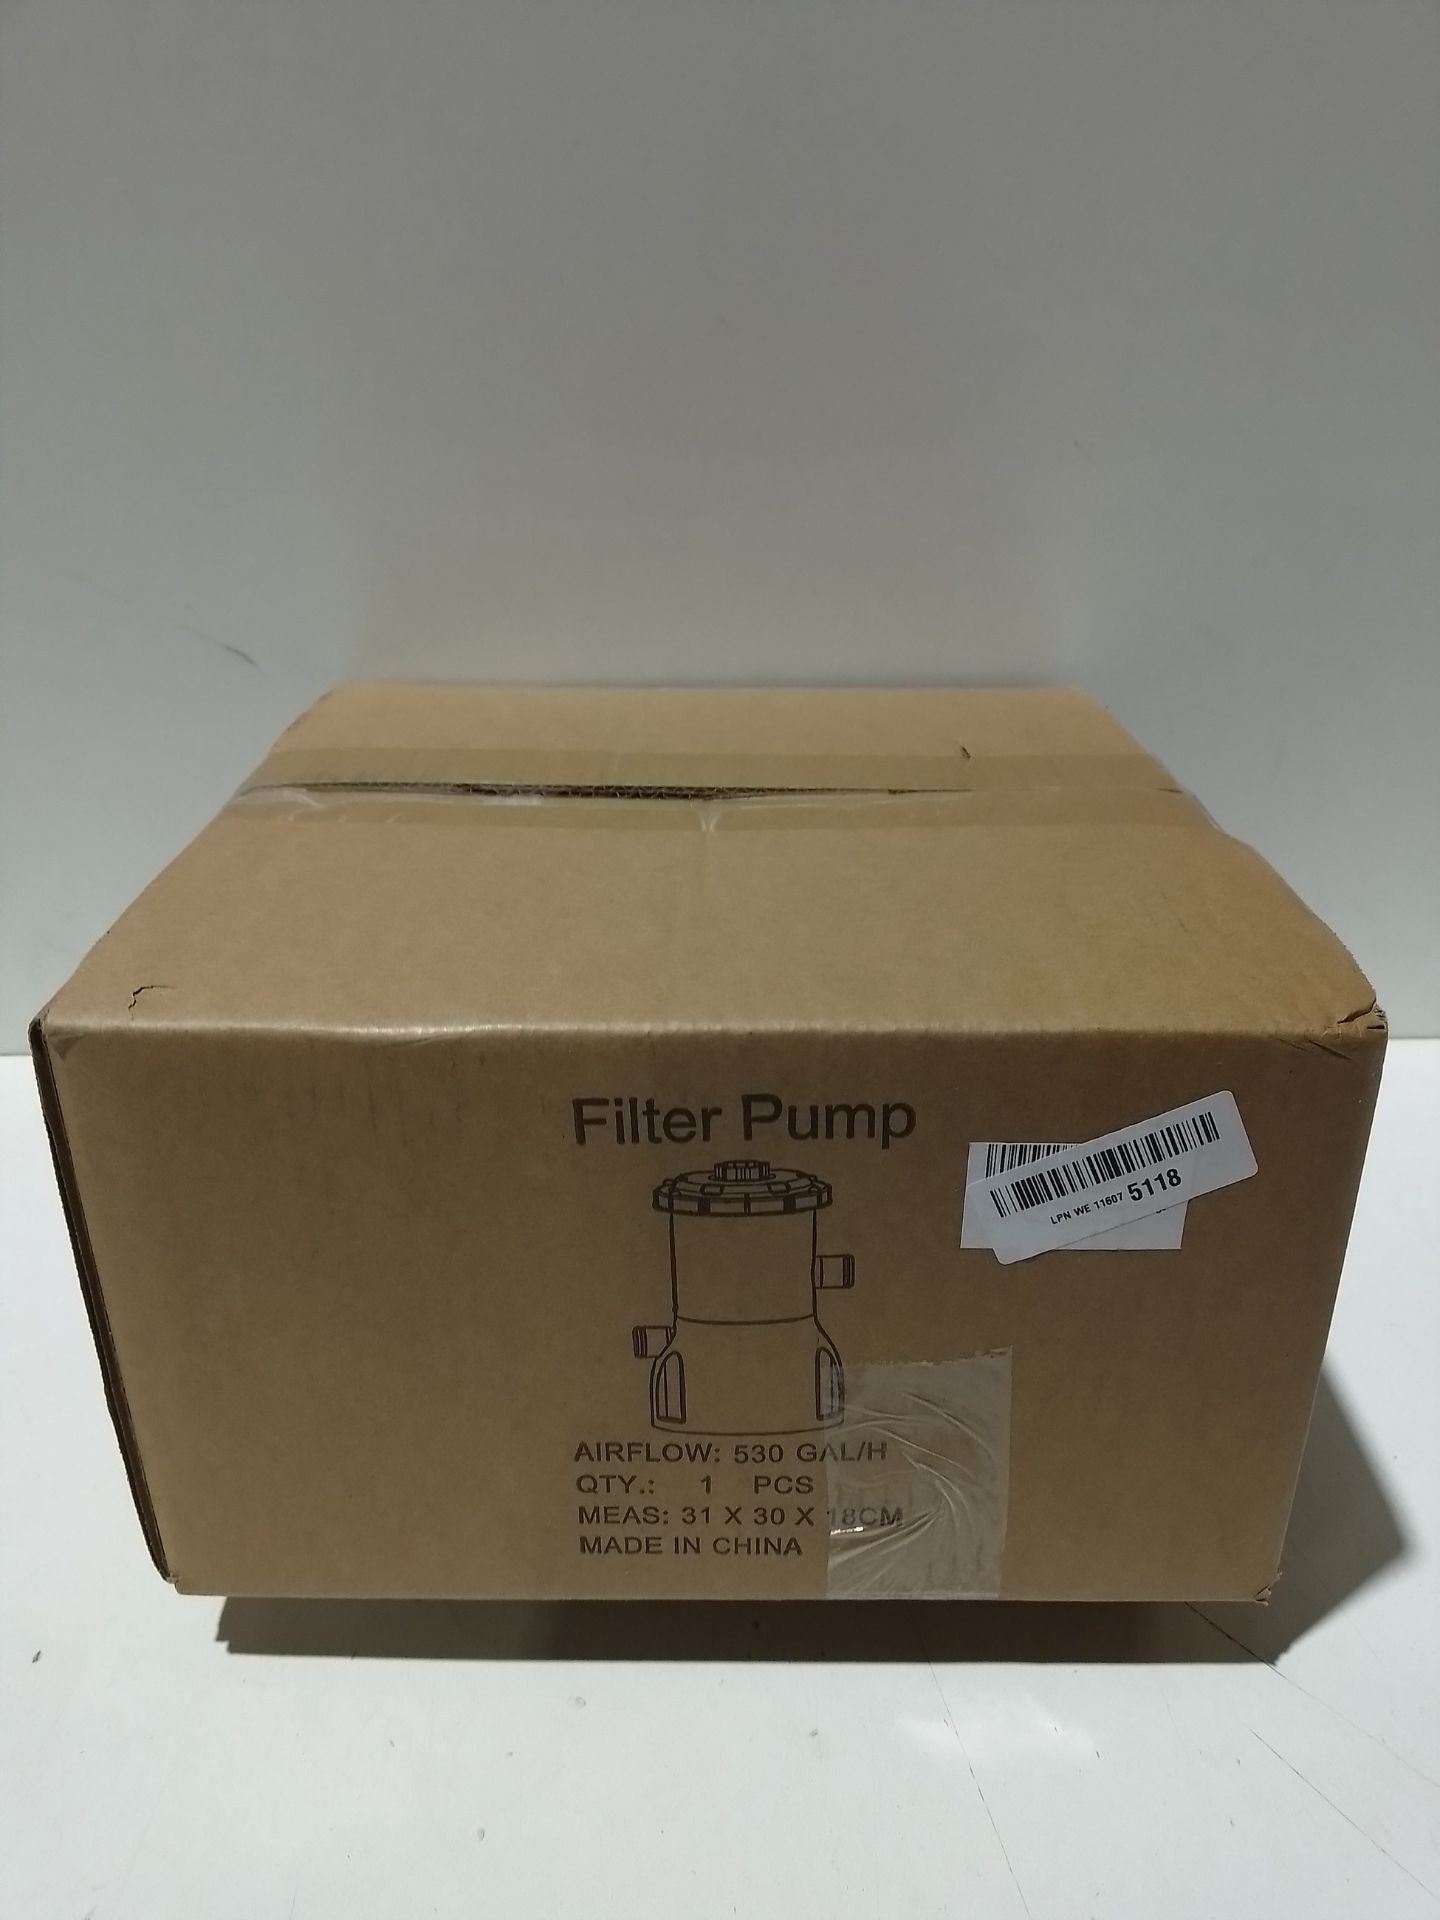 RRP £39.98 Evoio Pool Filter Pump Above Ground - Image 2 of 2